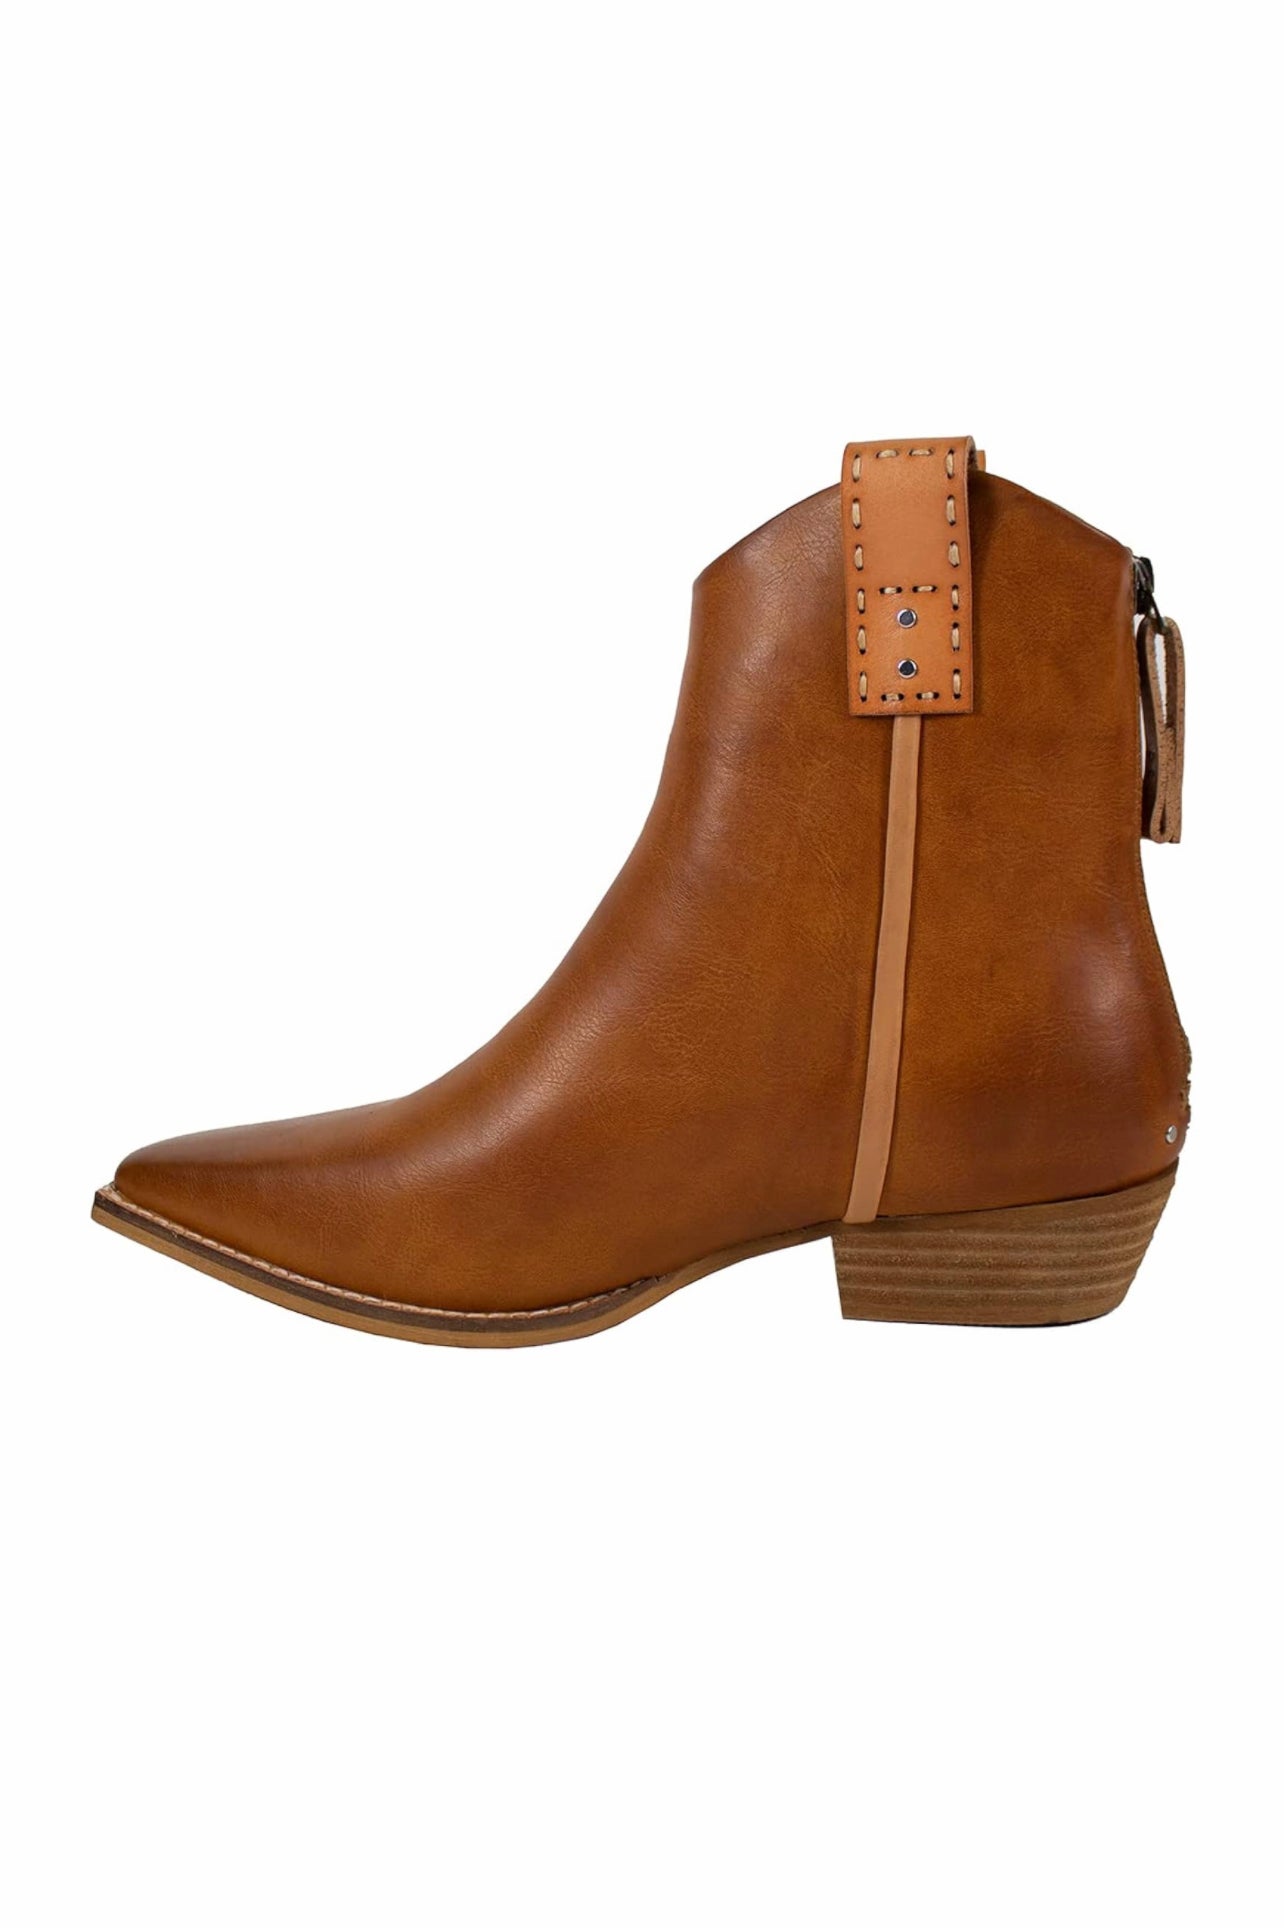 Free reign ankle boot brown